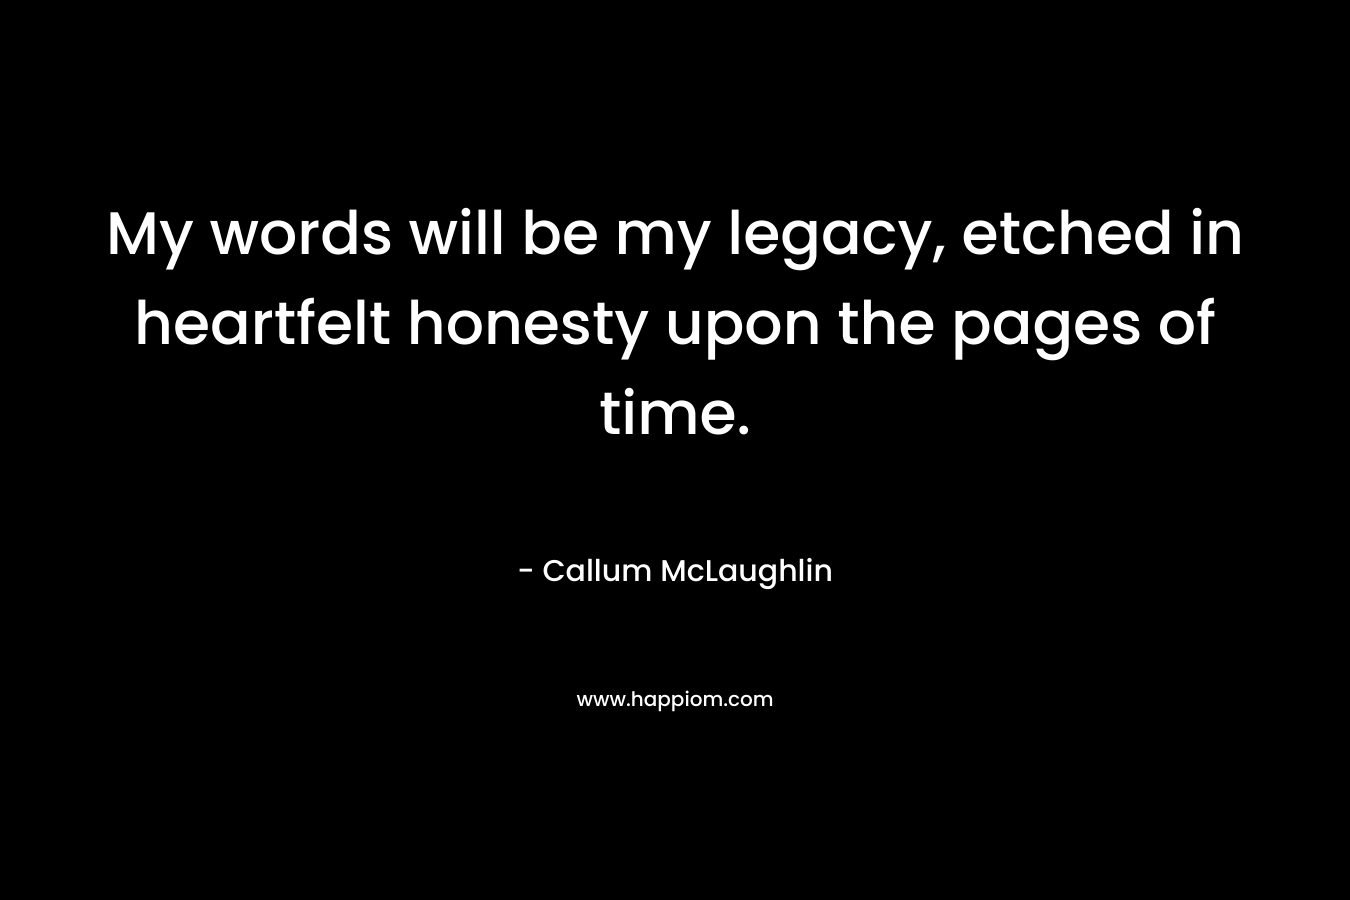 My words will be my legacy, etched in heartfelt honesty upon the pages of time. – Callum McLaughlin